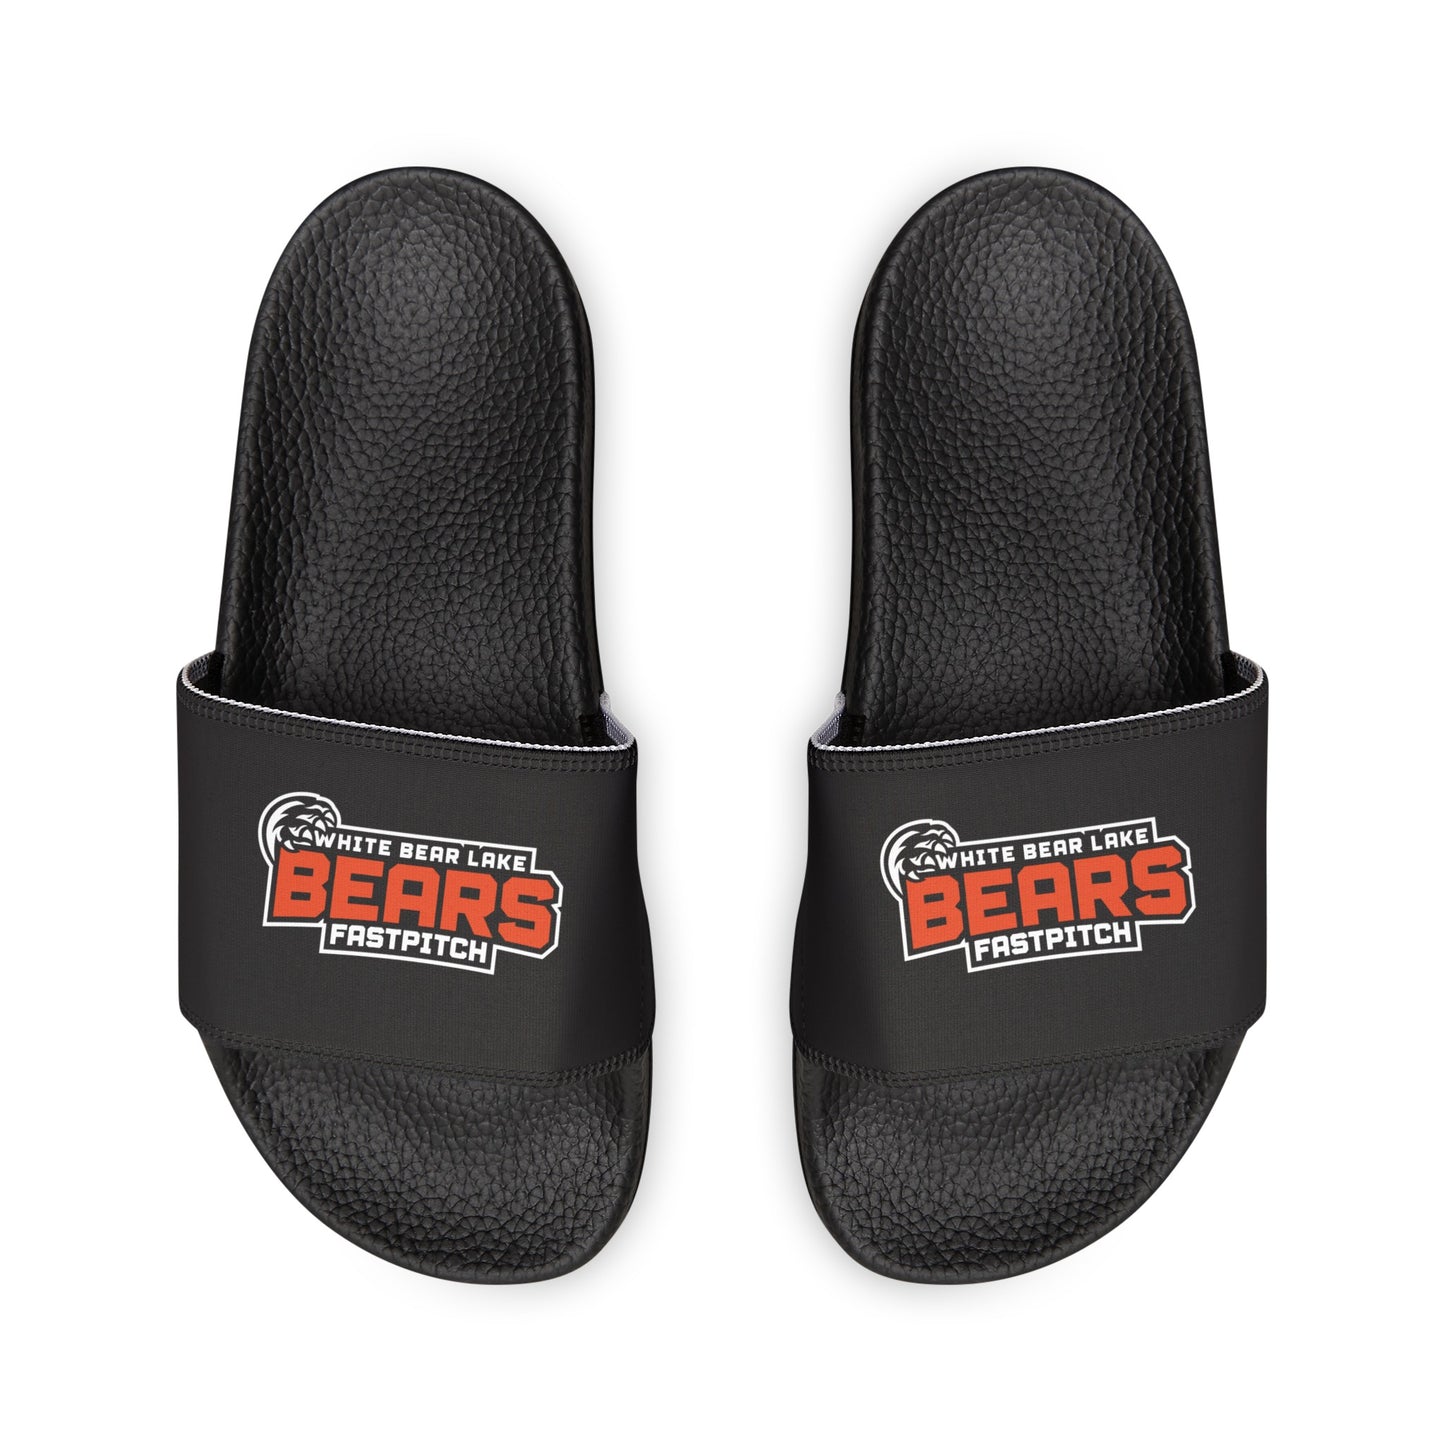 White Bear Lake Fastpitch Softball Youth Removable-Strap Sandals